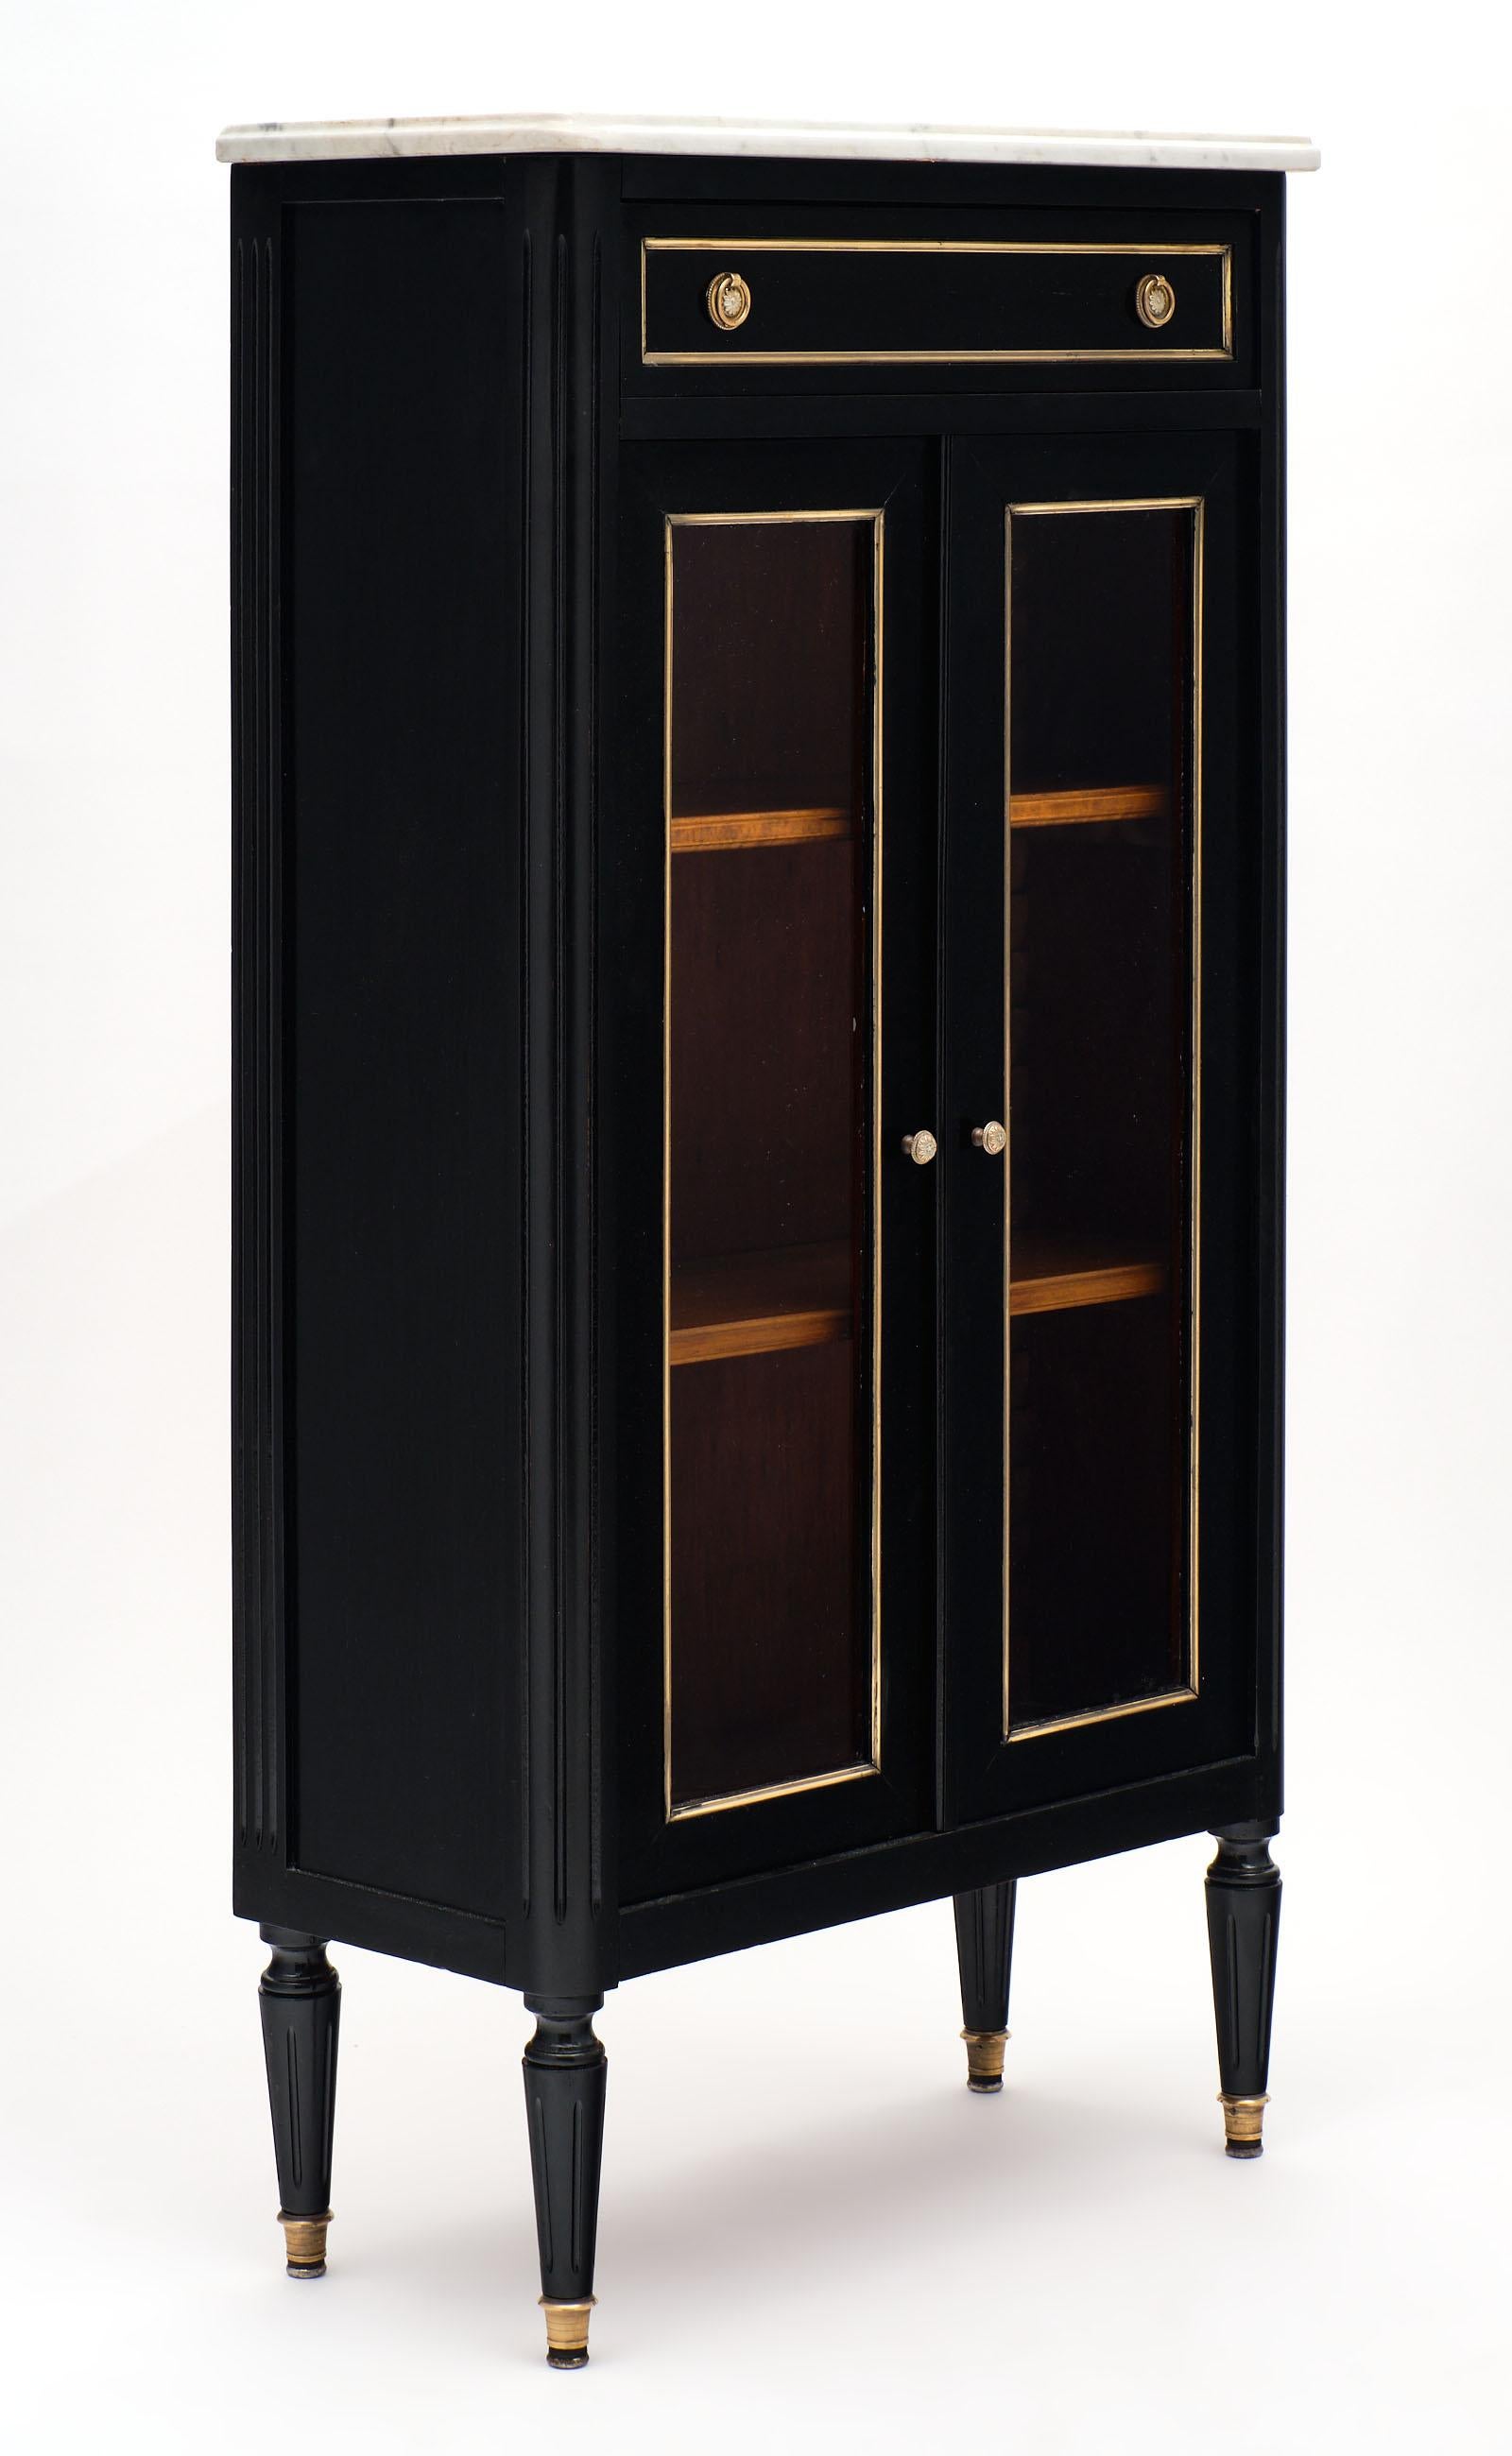 Petite ebonized Louis XVI style bookcase with Classic French elegance and two glass doors trimmed in brass. There is also a dovetailed top drawer and a beautiful Carrara marble top. This piece is made of mahogany that has been finished with a French